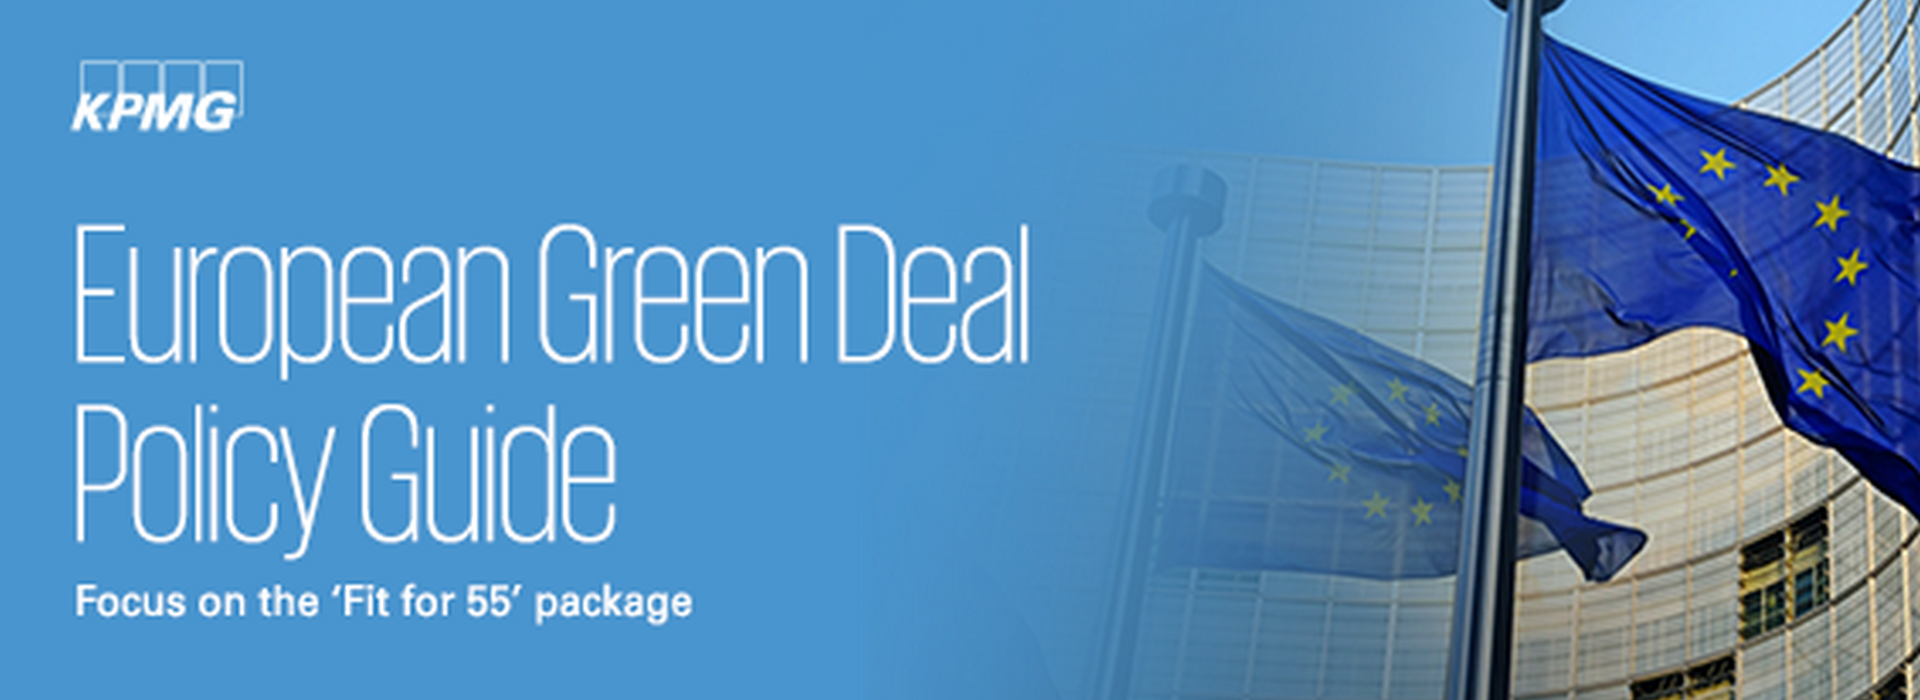 KPMG: European Green Deal Policy Guide